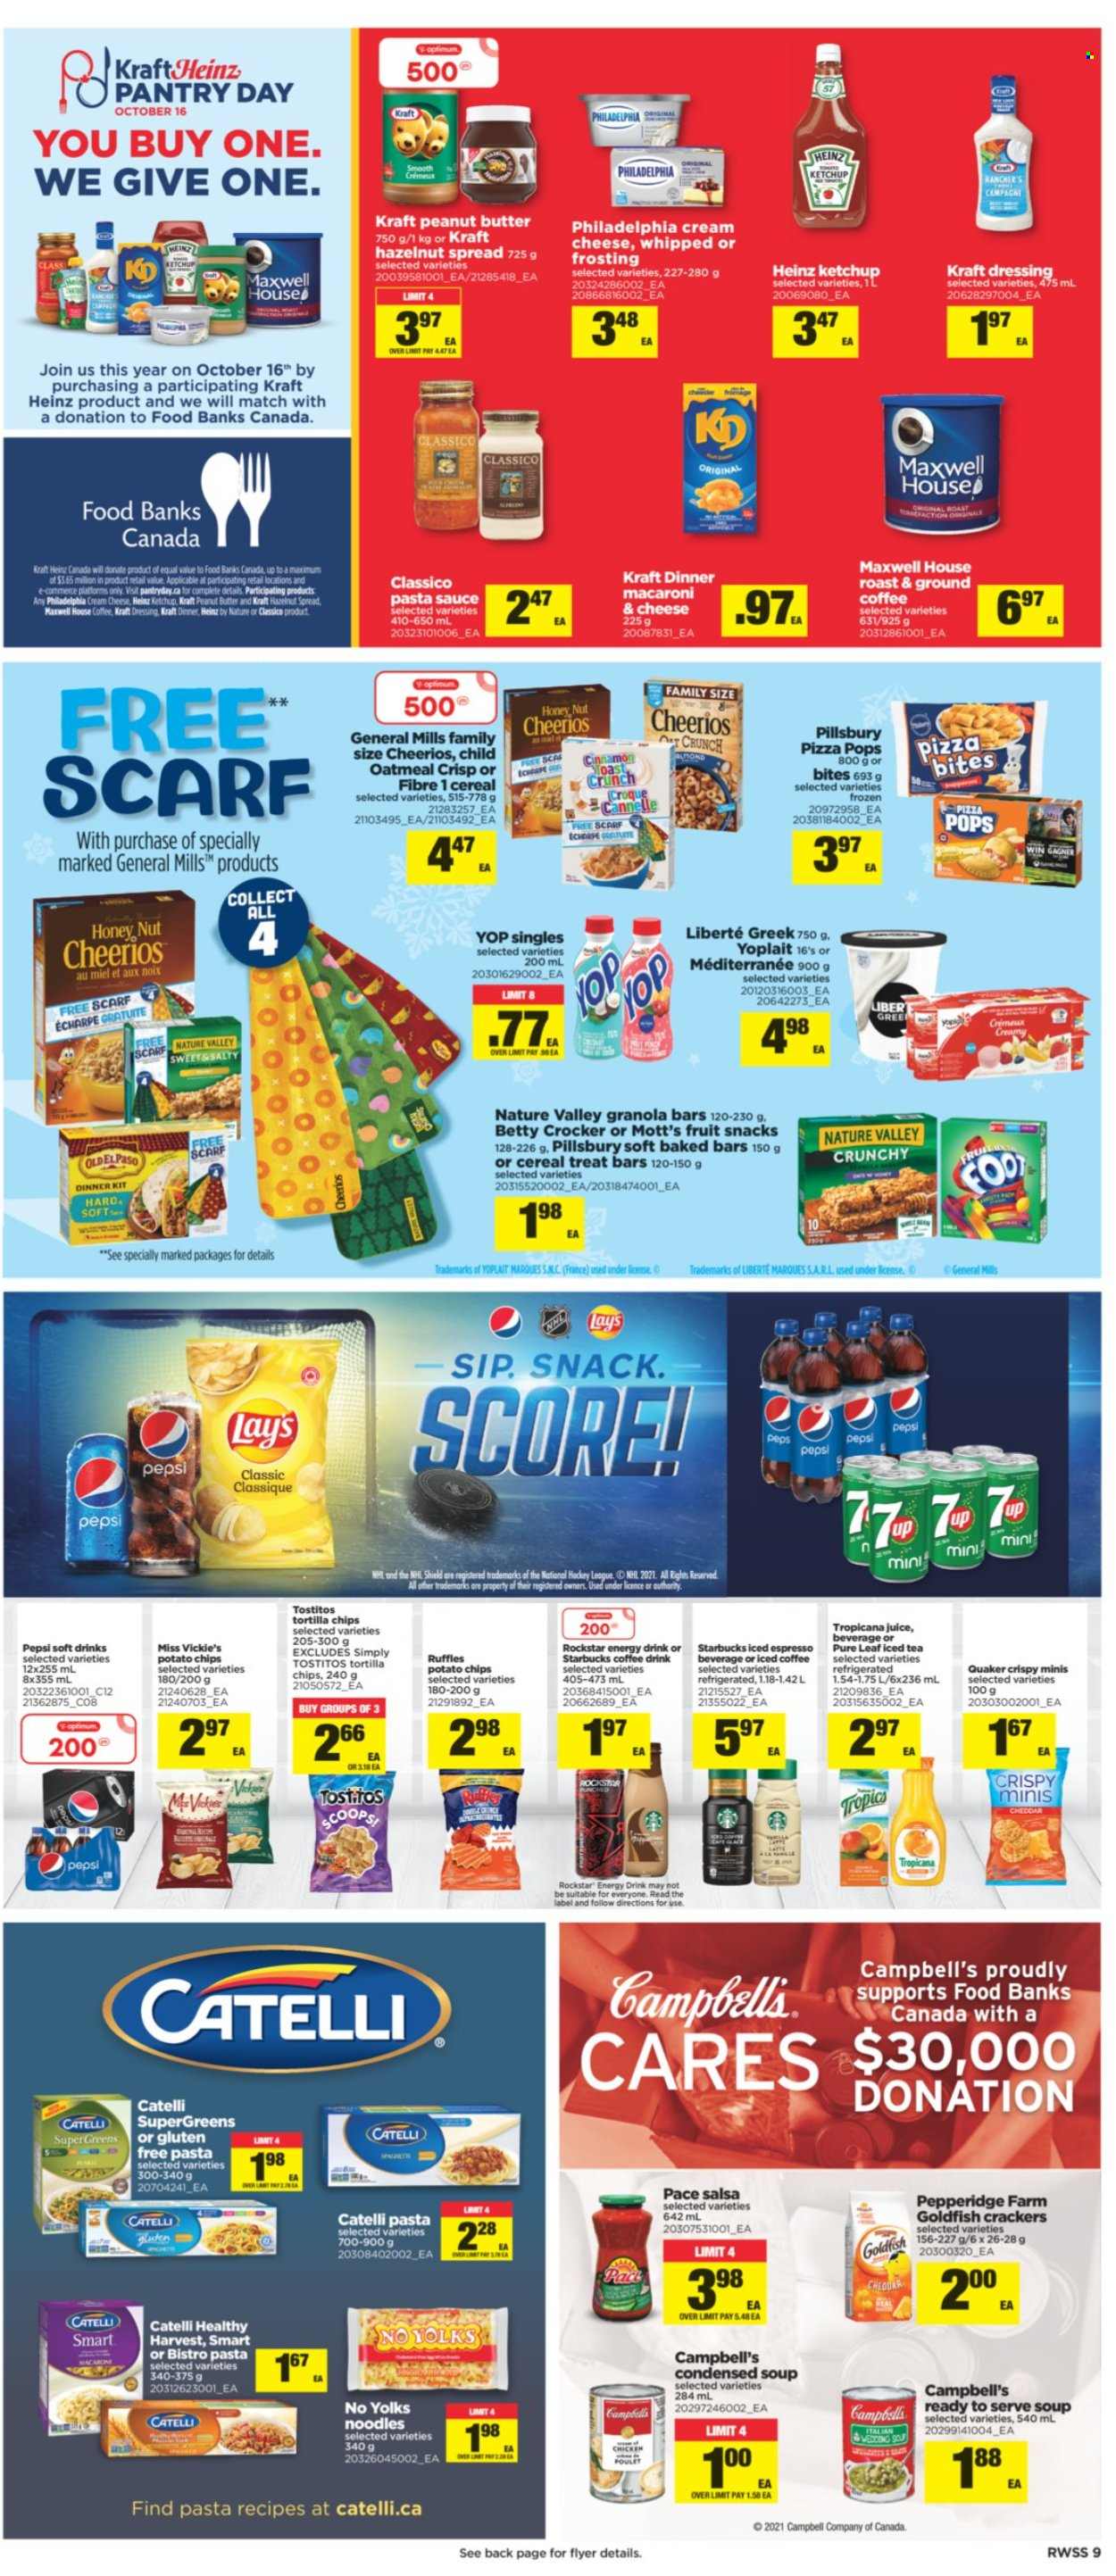 thumbnail - Real Canadian Superstore Flyer - October 15, 2021 - October 21, 2021 - Sales products - Mott's, Campbell's, macaroni & cheese, pizza, pasta sauce, condensed soup, soup, sauce, Pillsbury, dinner kit, Quaker, noodles, instant soup, Kraft®, cream cheese, Yoplait, crackers, fruit snack, tortilla chips, potato chips, Lay’s, Goldfish, Ruffles, Tostitos, frosting, oatmeal, Heinz, Cheerios, granola bar, Nature Valley, cinnamon, dressing, salsa, Classico, peanut butter, hazelnut spread, Pepsi, juice, energy drink, ice tea, soft drink, Rockstar, iced coffee, Maxwell House, Pure Leaf, ground coffee, Starbucks, Optimum, ketchup, Philadelphia. Page 9.